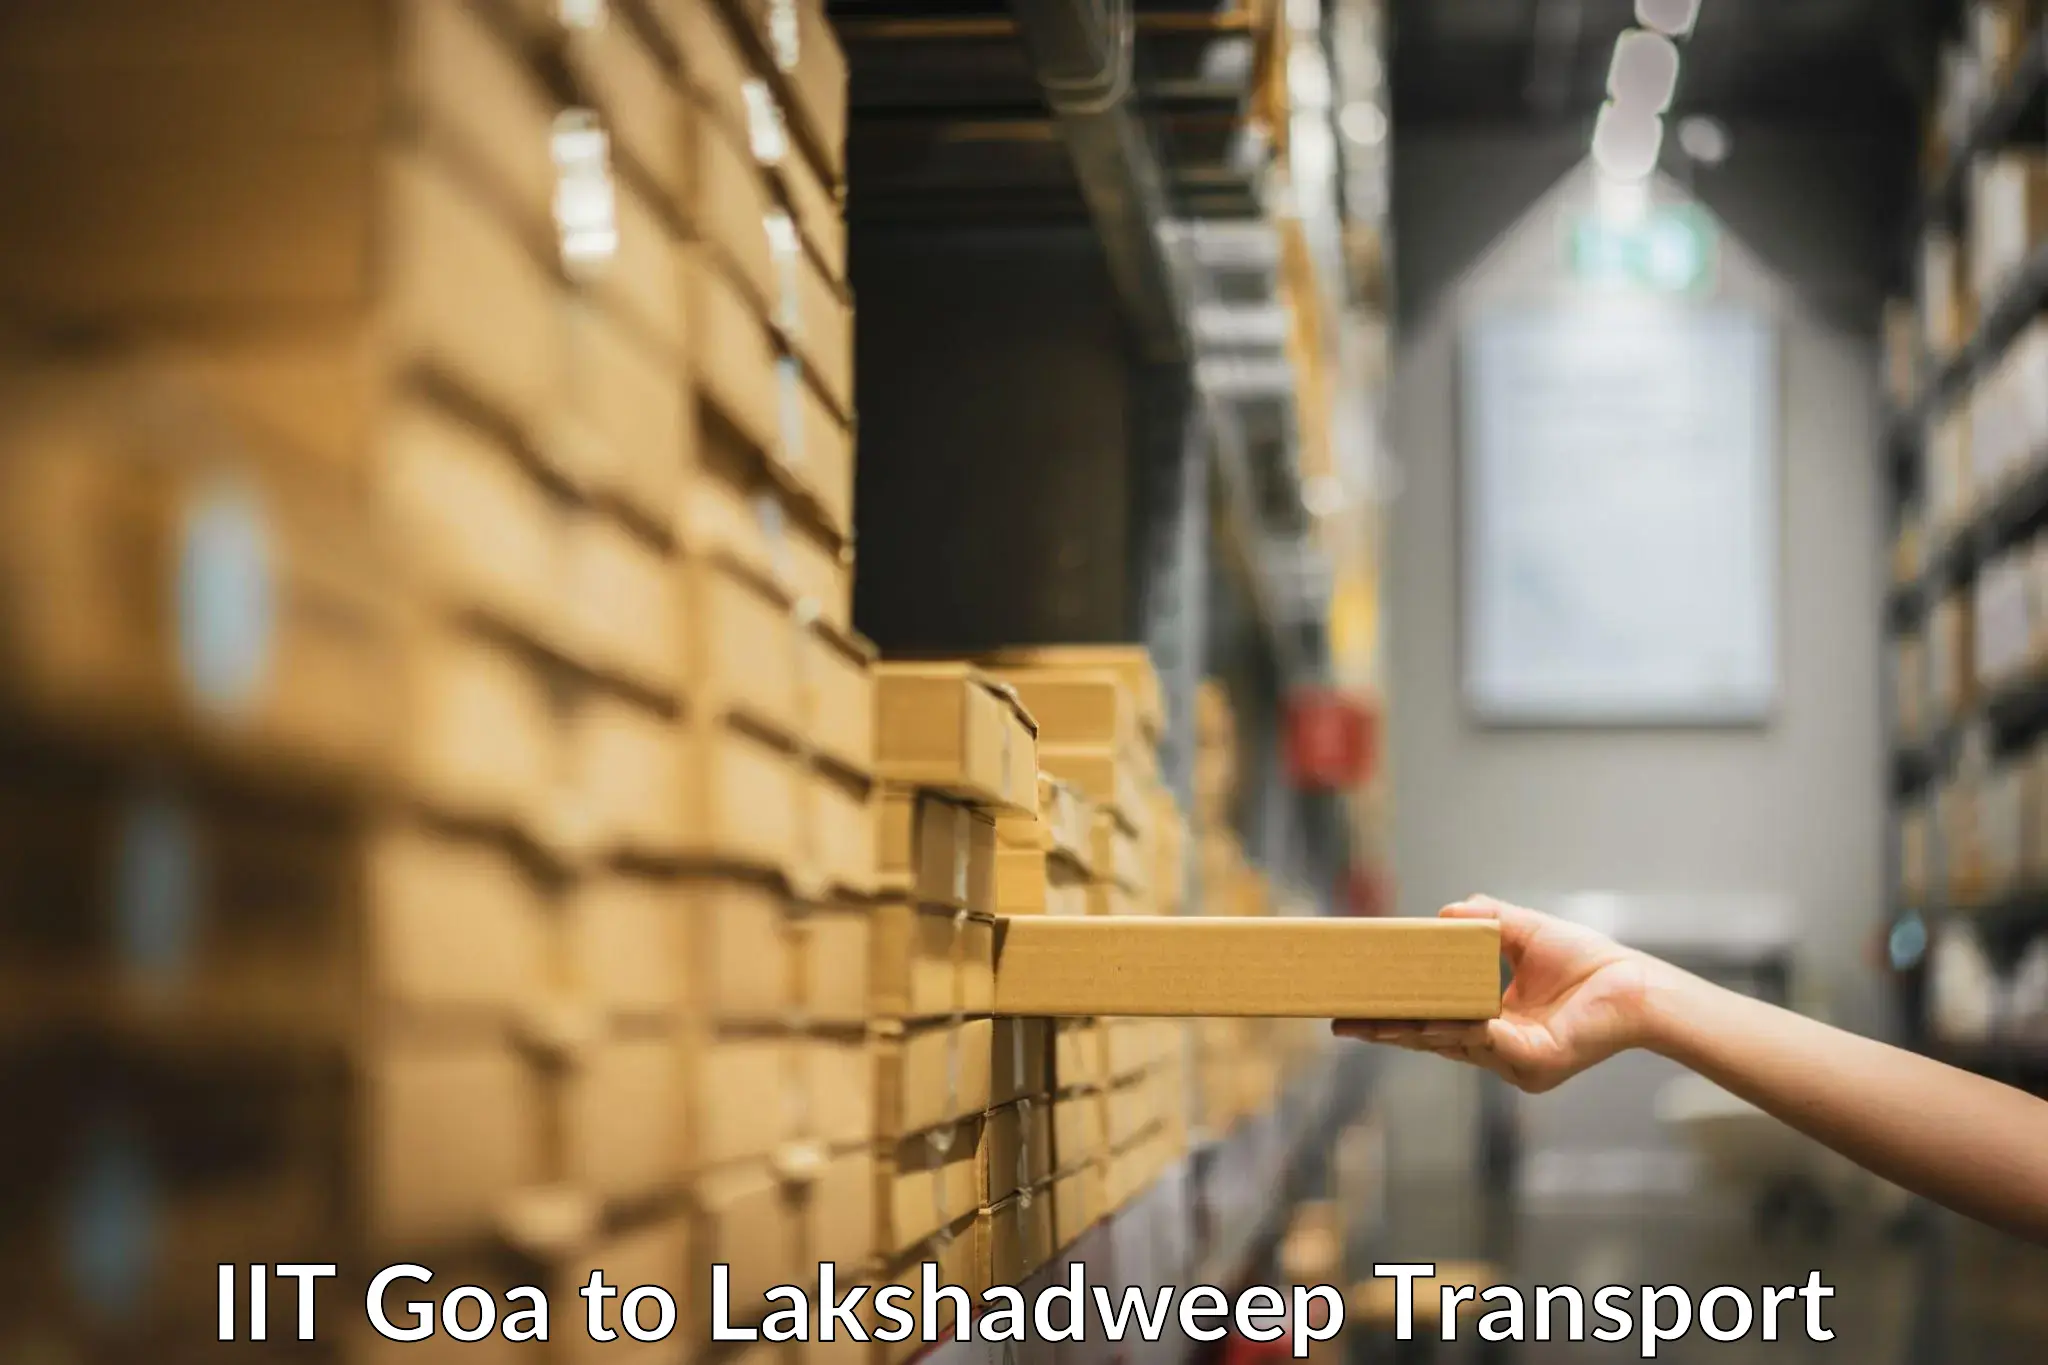 Nationwide transport services in IIT Goa to Lakshadweep